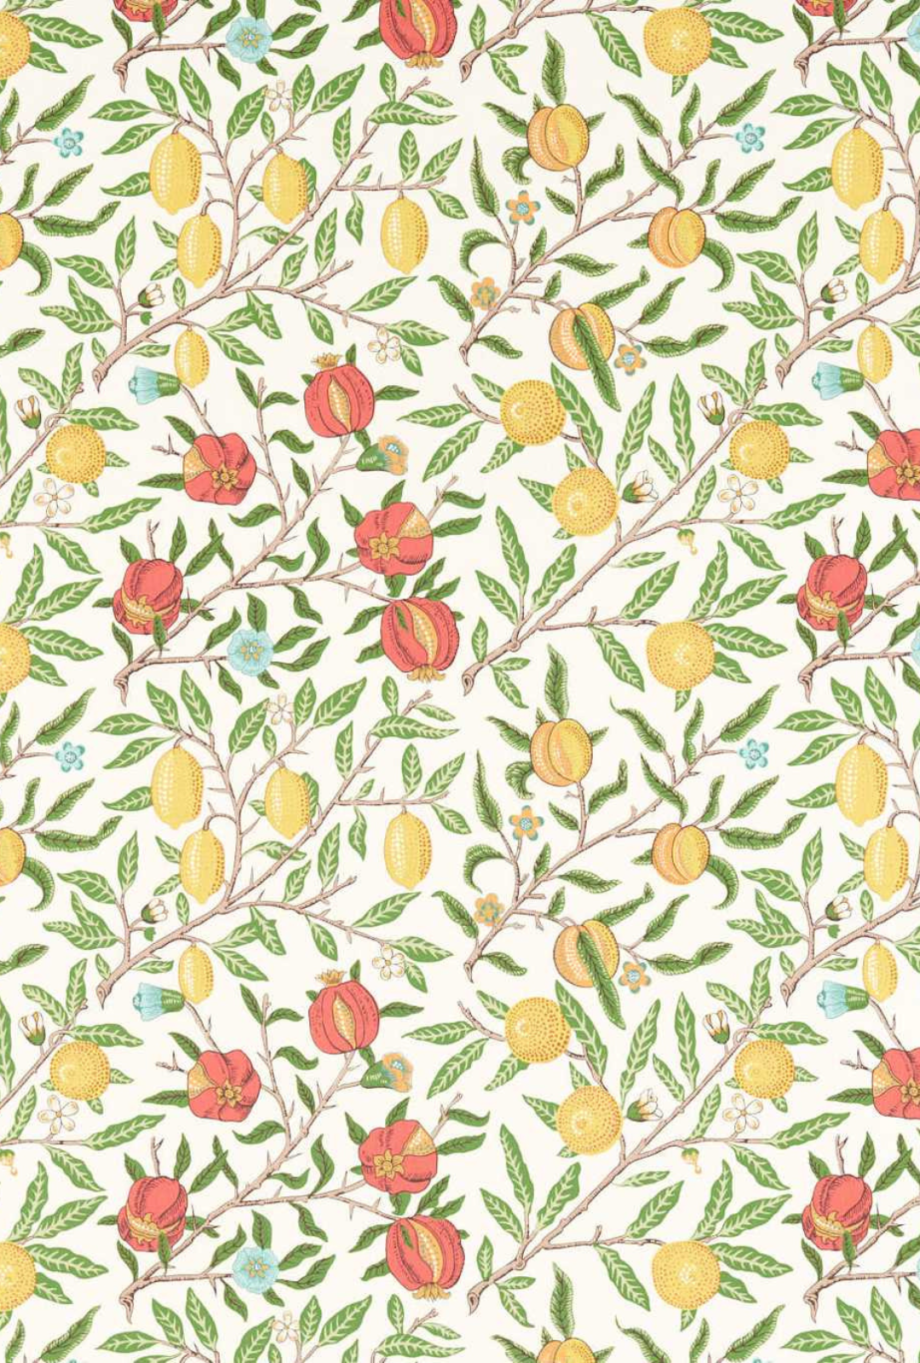 A bright floral fabric with lemons